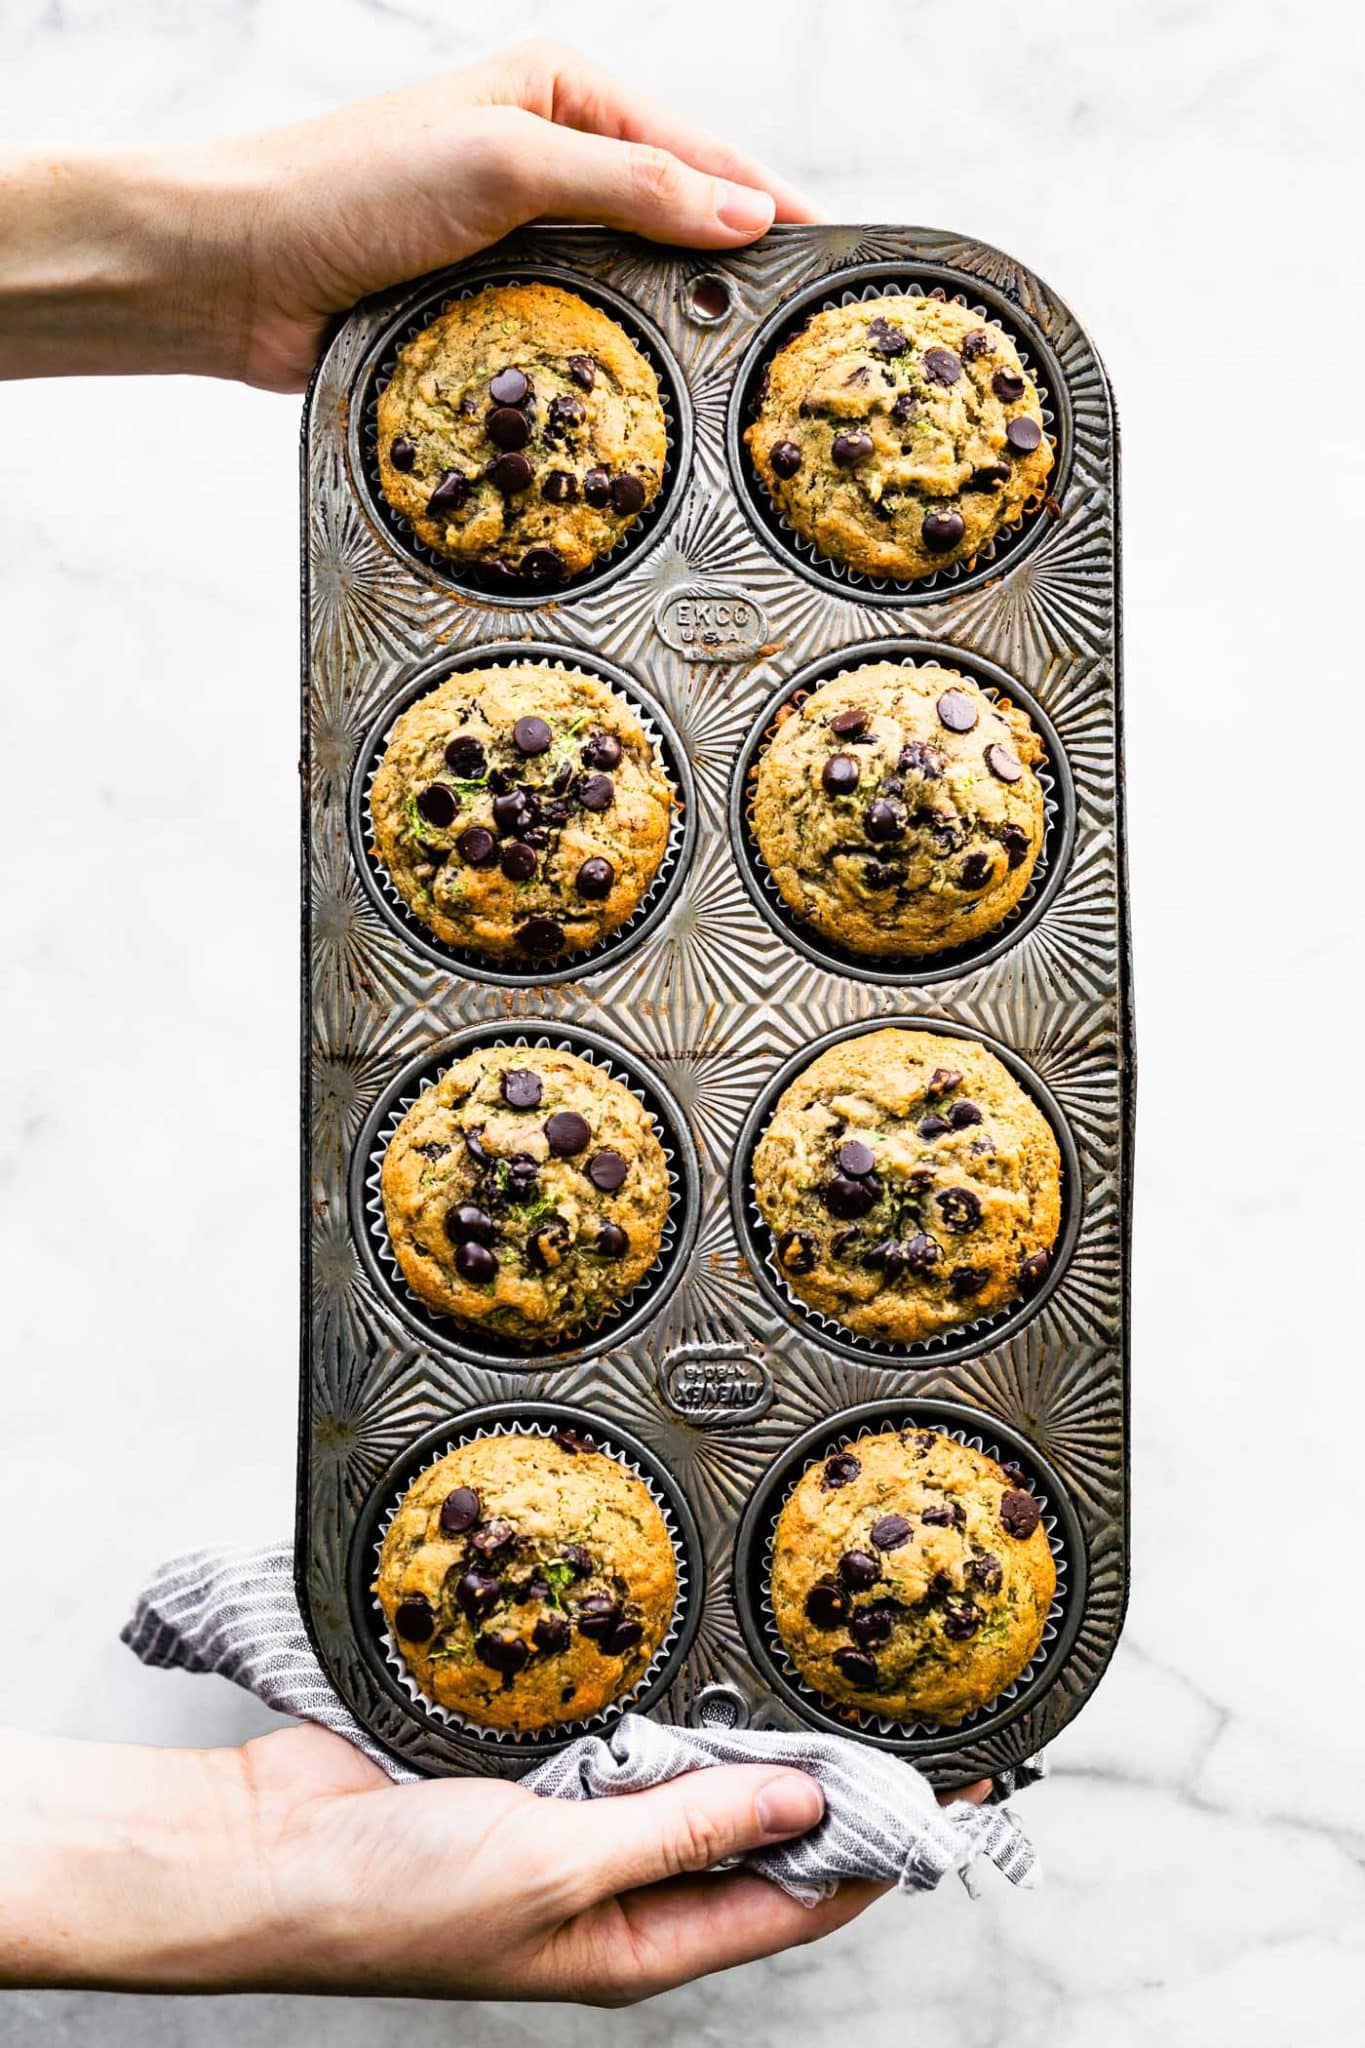 two hands holding a muffin tin with 8 baked gluten free zucchini muffins topped with chocolate chips